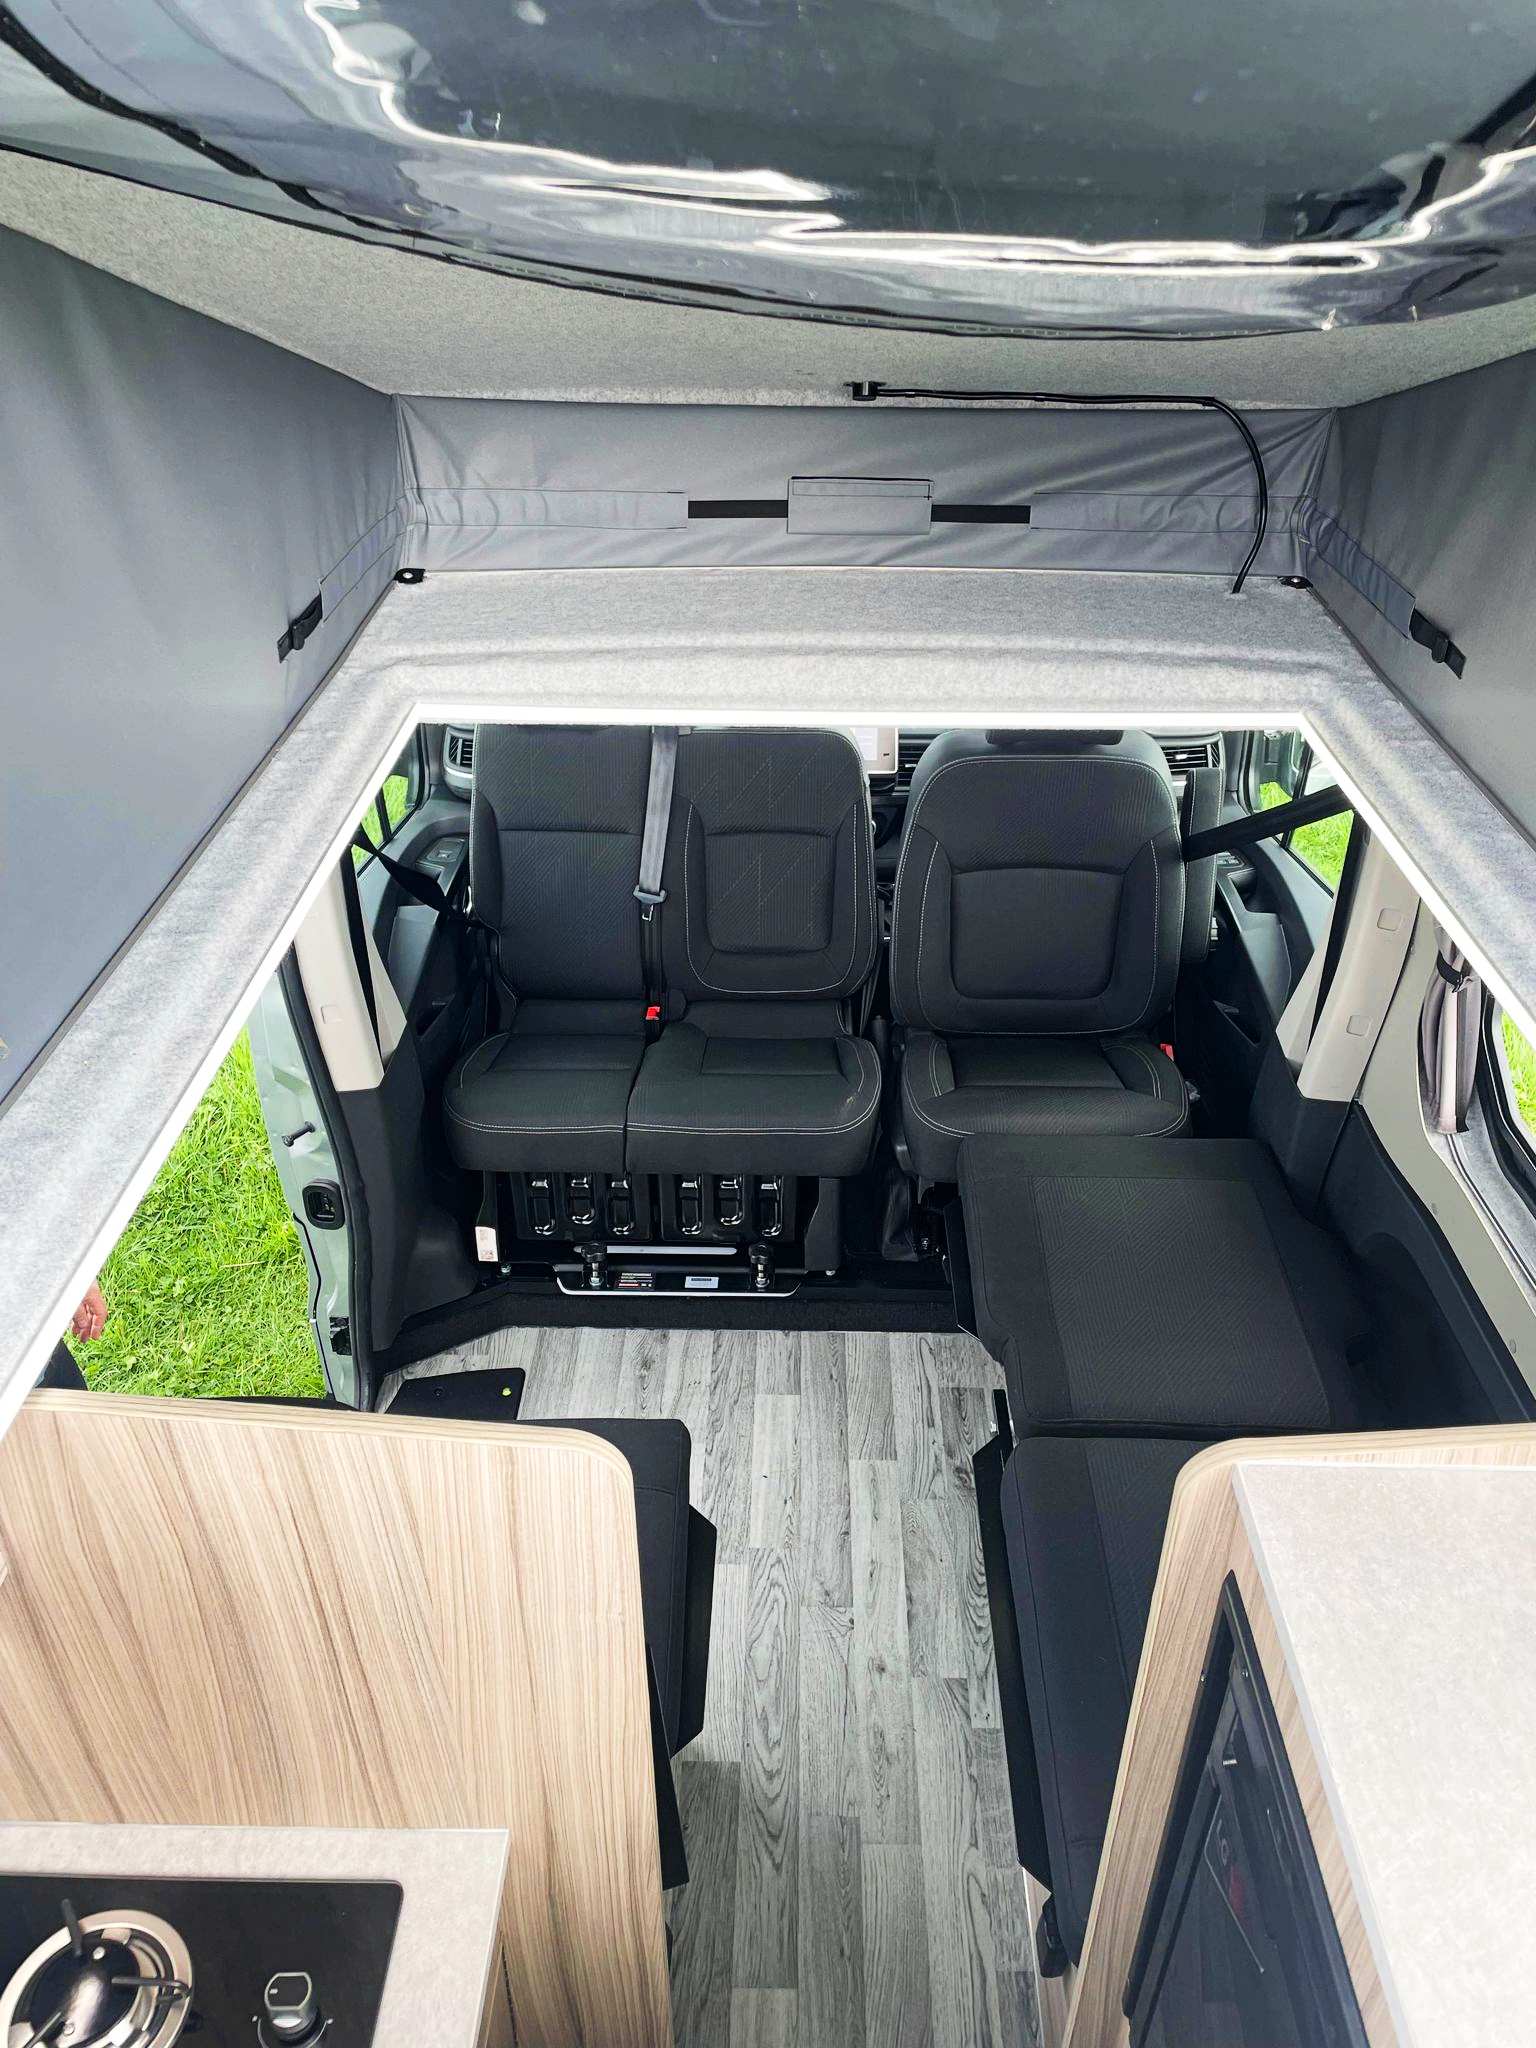 The Witley Camper Van Conversion for the Vauxhall Vivaro, Renault Trafic, Nissan NV300 Fiat Talento with up to  six 6 traveling seat camper - cccampers.myshopify.com